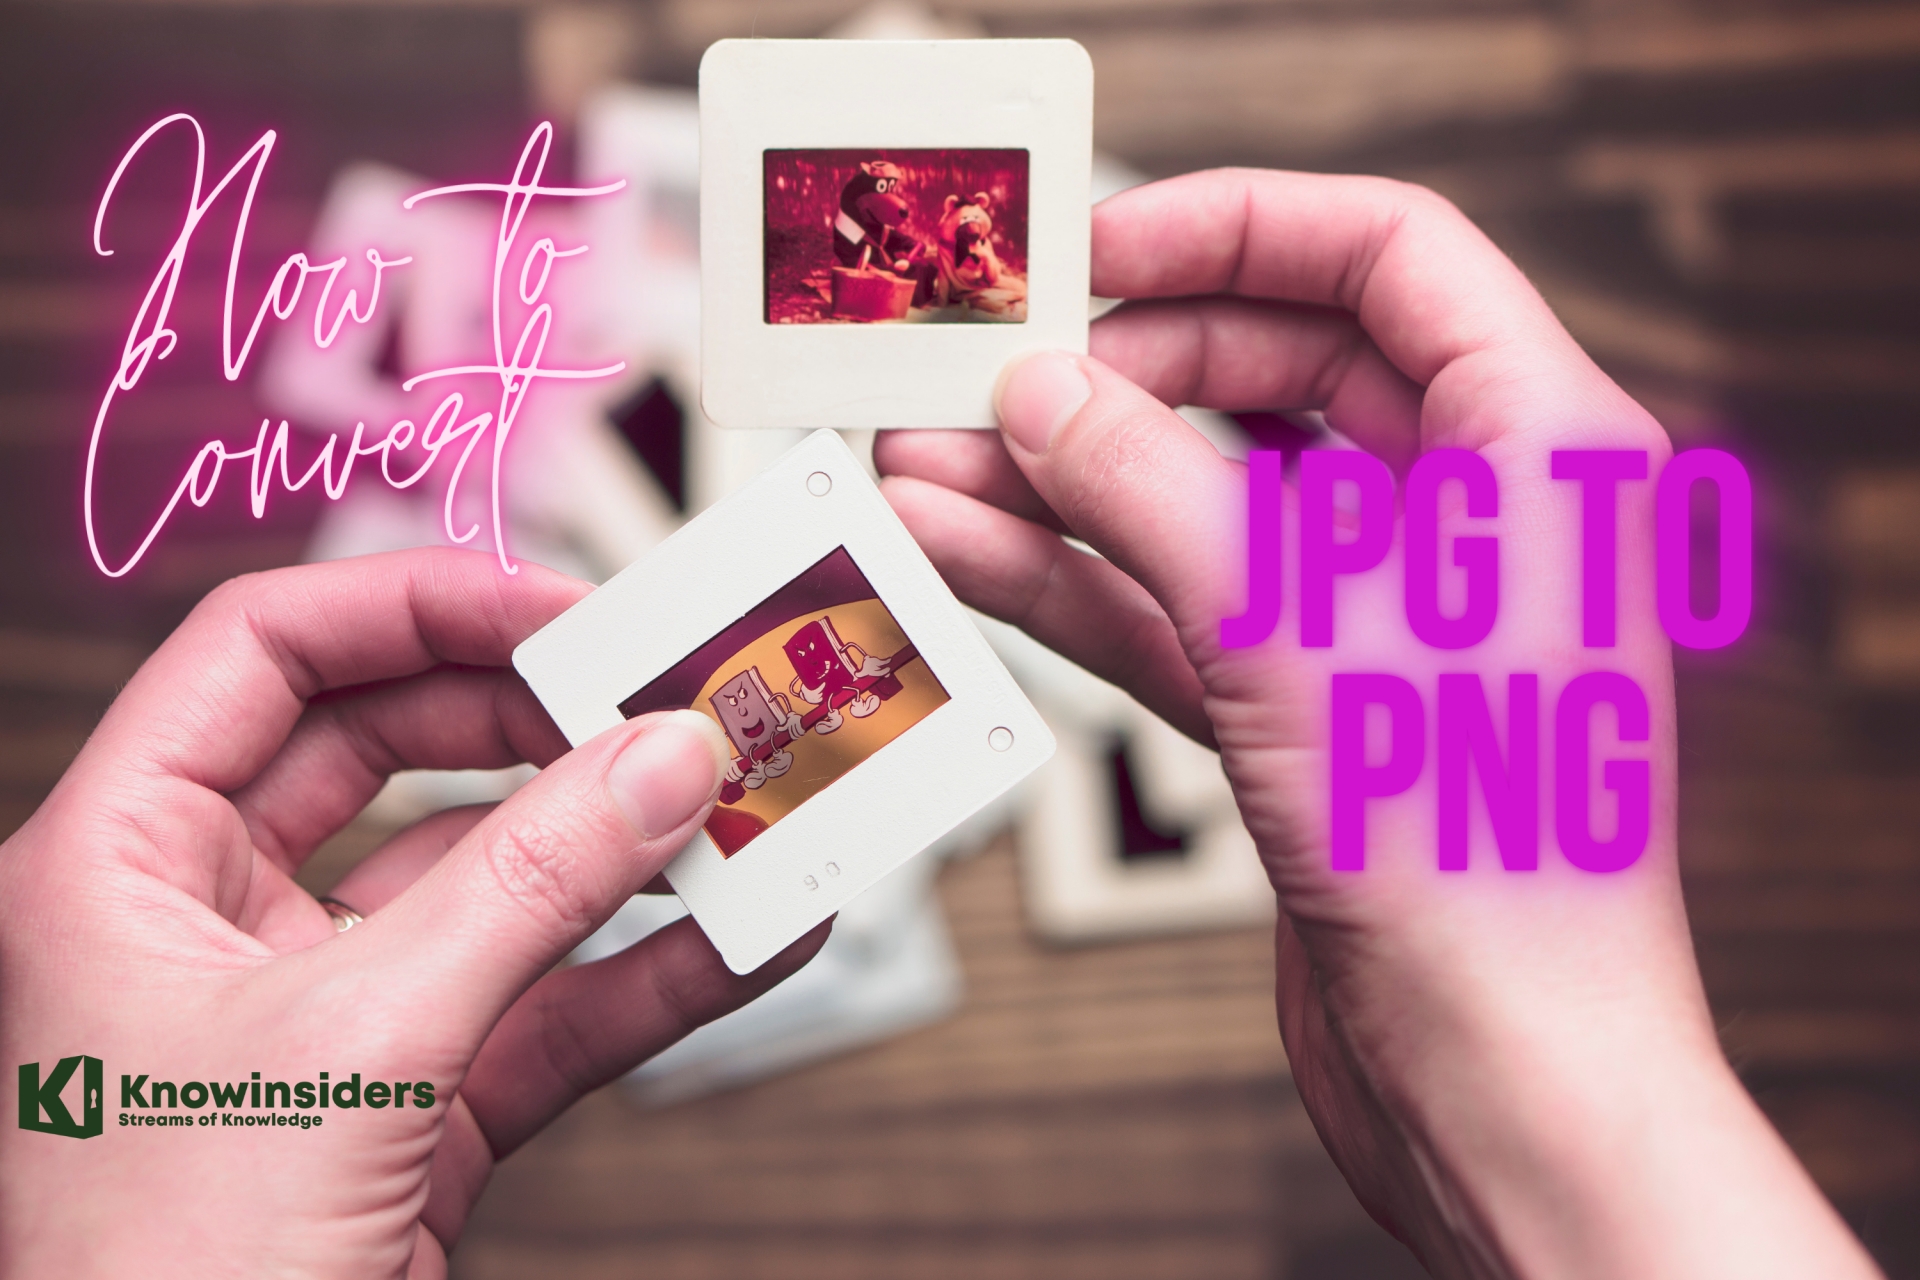 How to Convert JPG to PNG: Top Simple Ways to Change